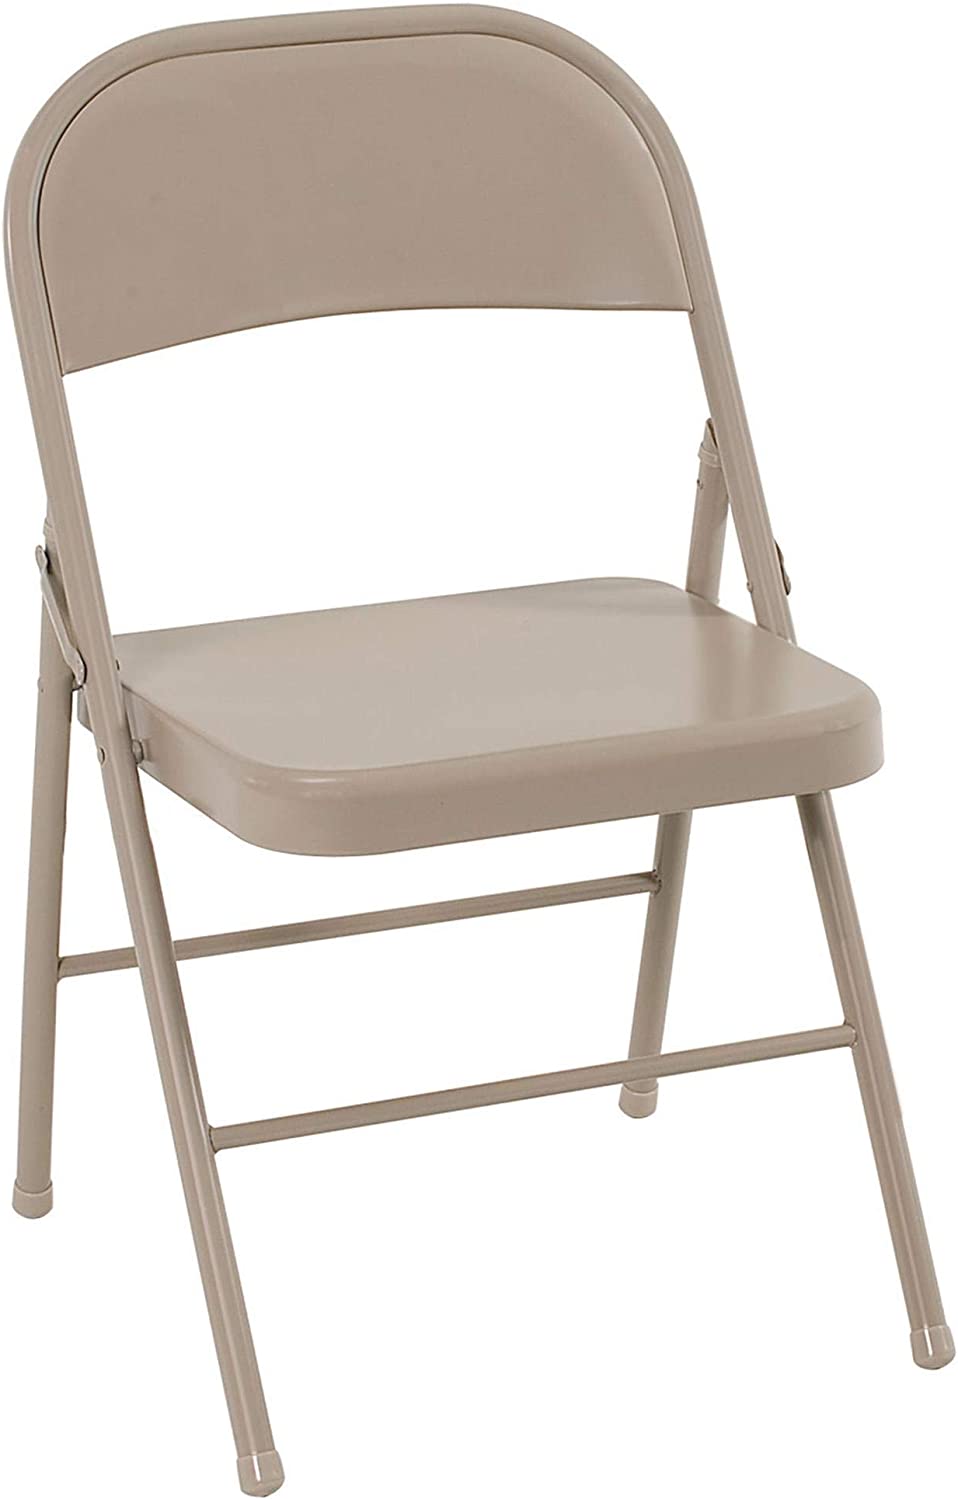 Cosco All Steel Folding Chair, 4 Pack, Antique Linen